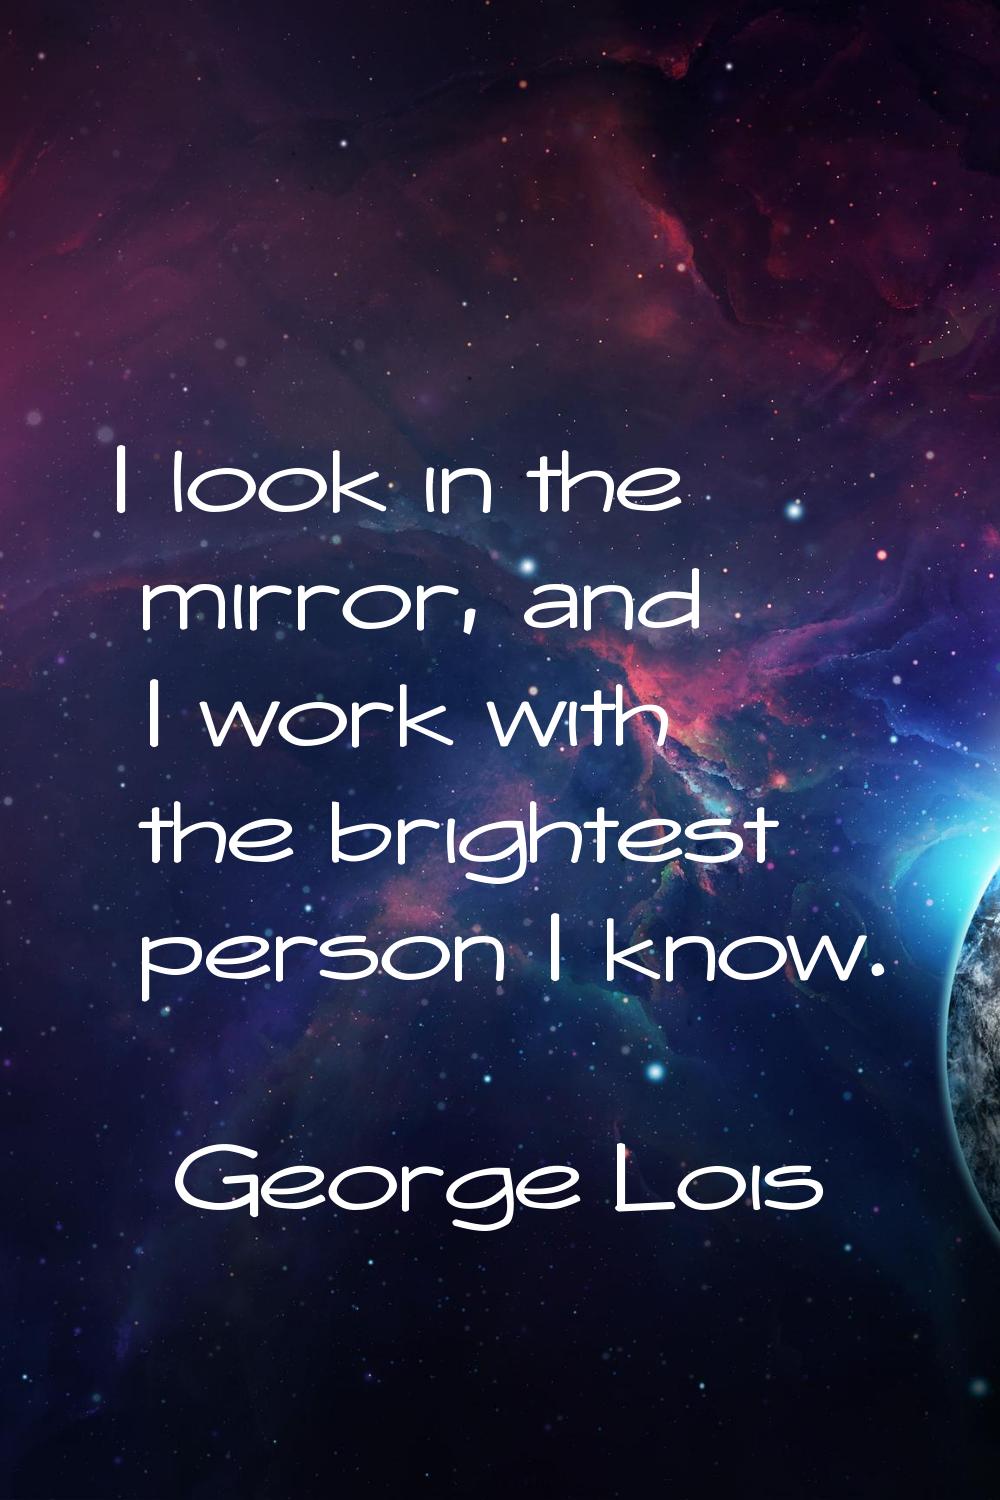 I look in the mirror, and I work with the brightest person I know.